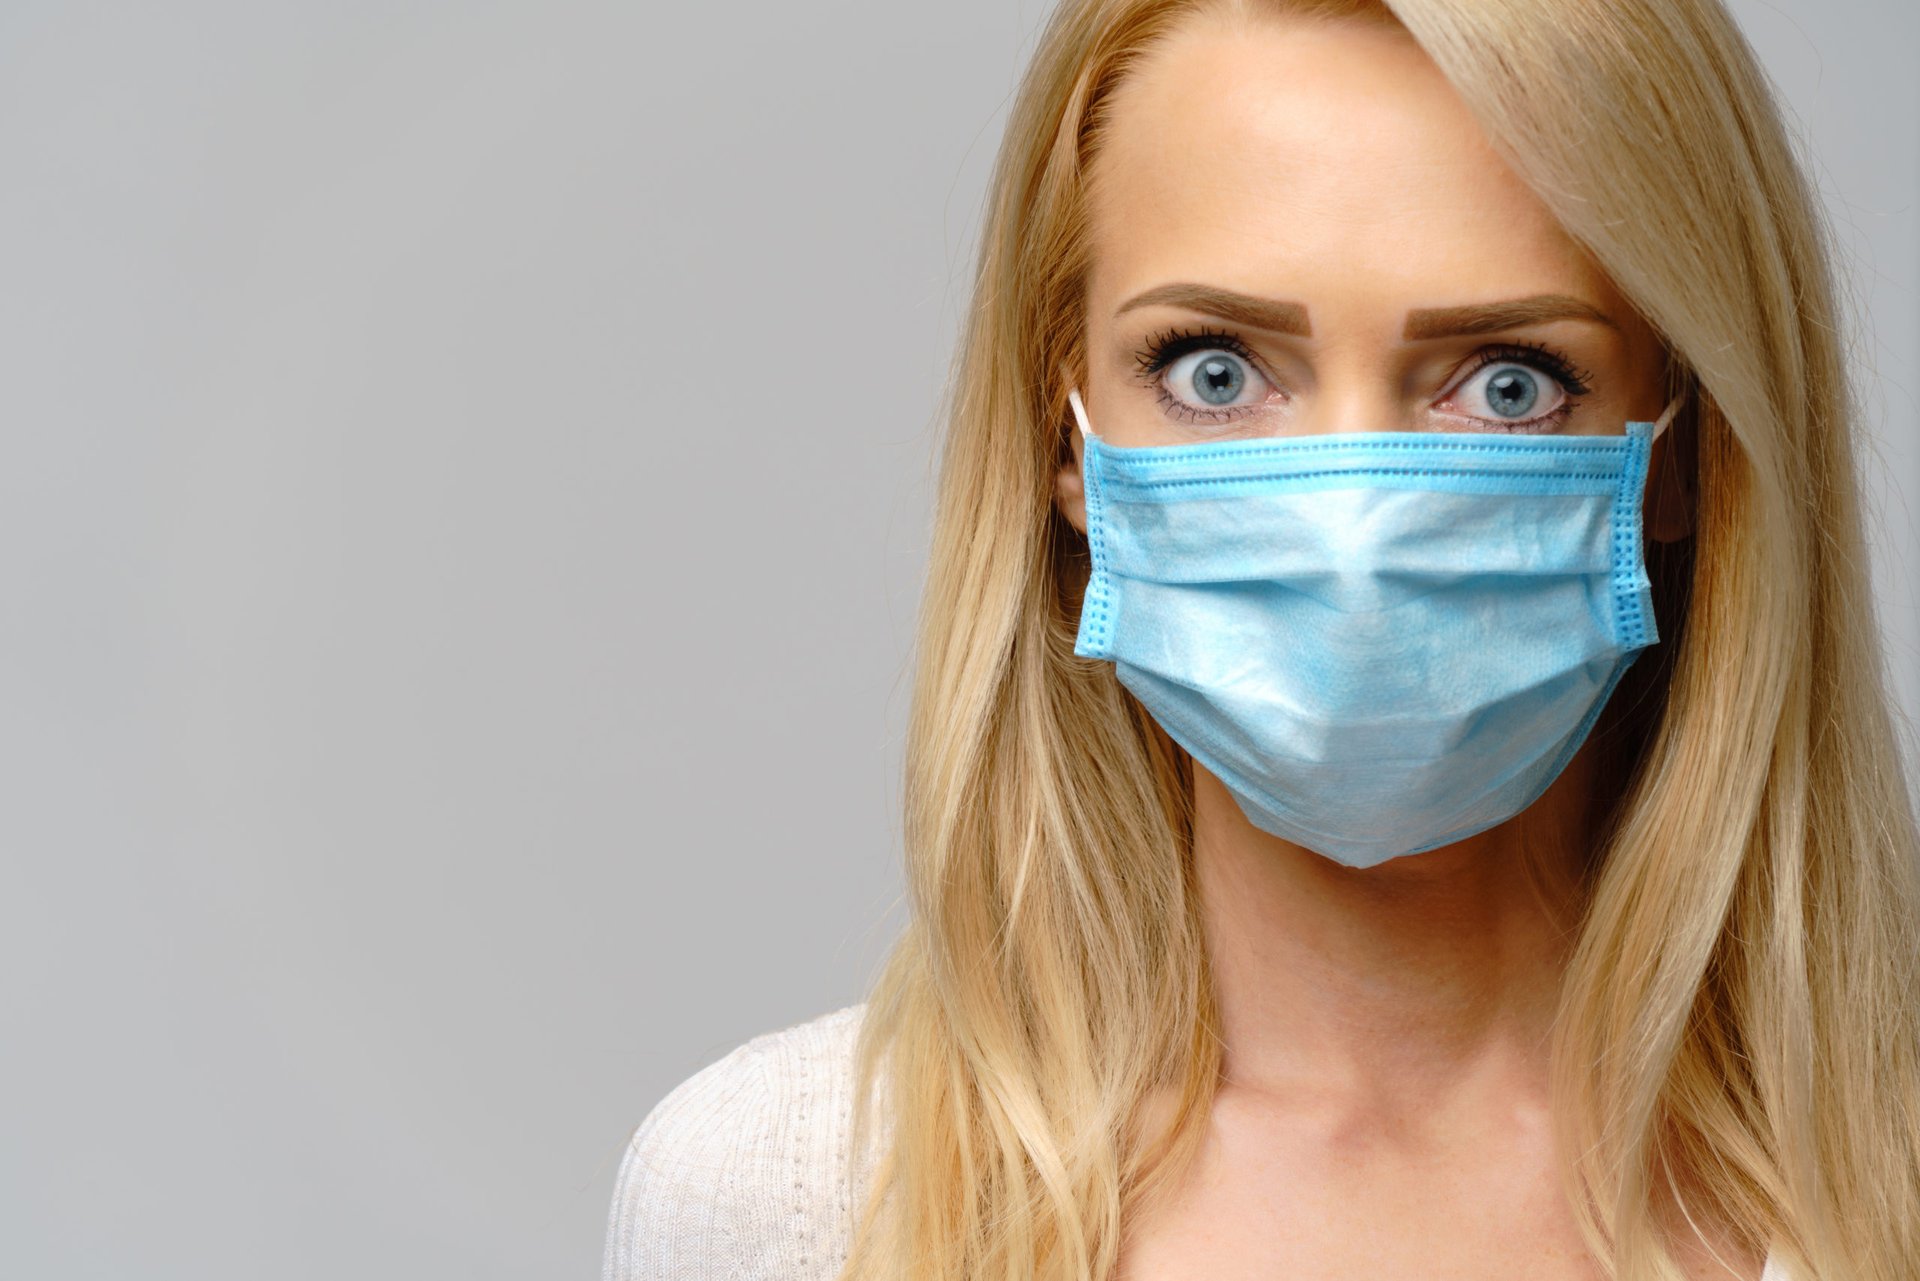 Woman wearing a face mask in the pandemic